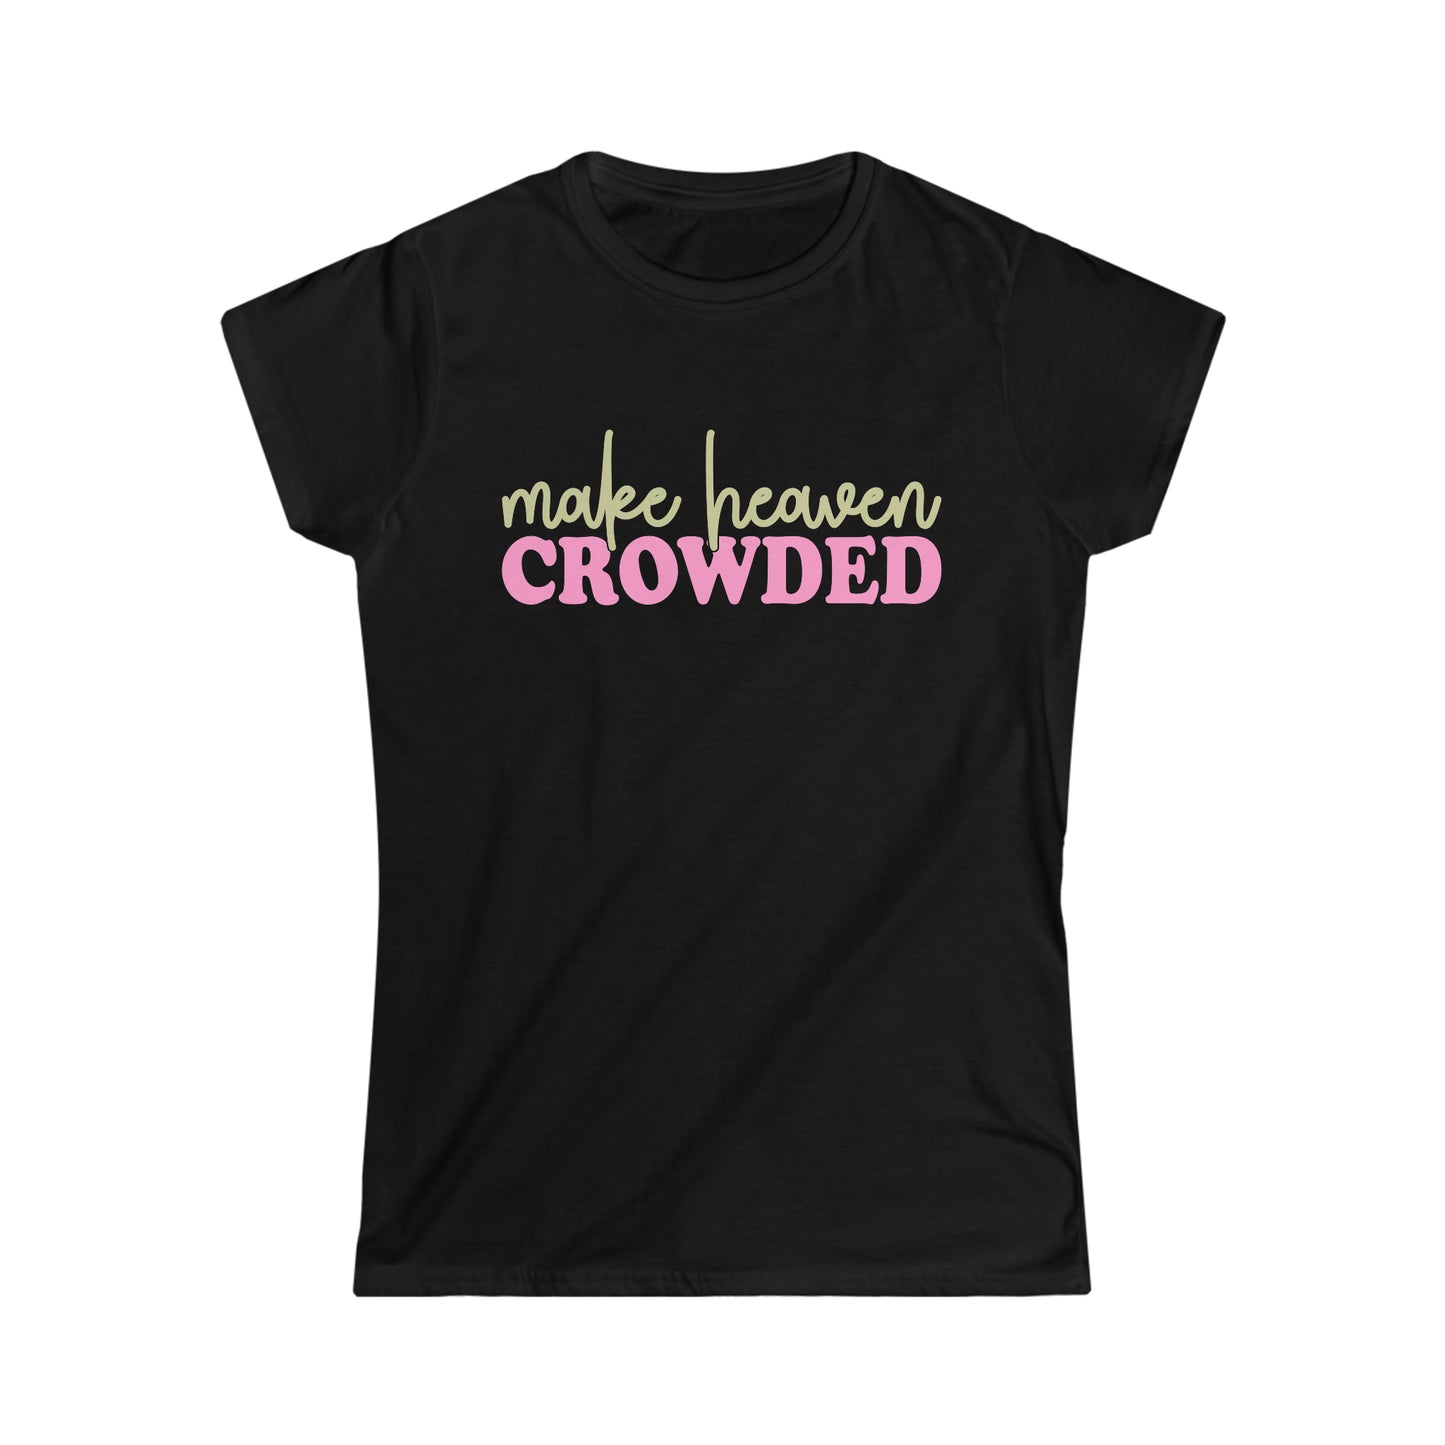 Christian Apparel (Make Heaven Crowded/ Women's Softstyle Tee)